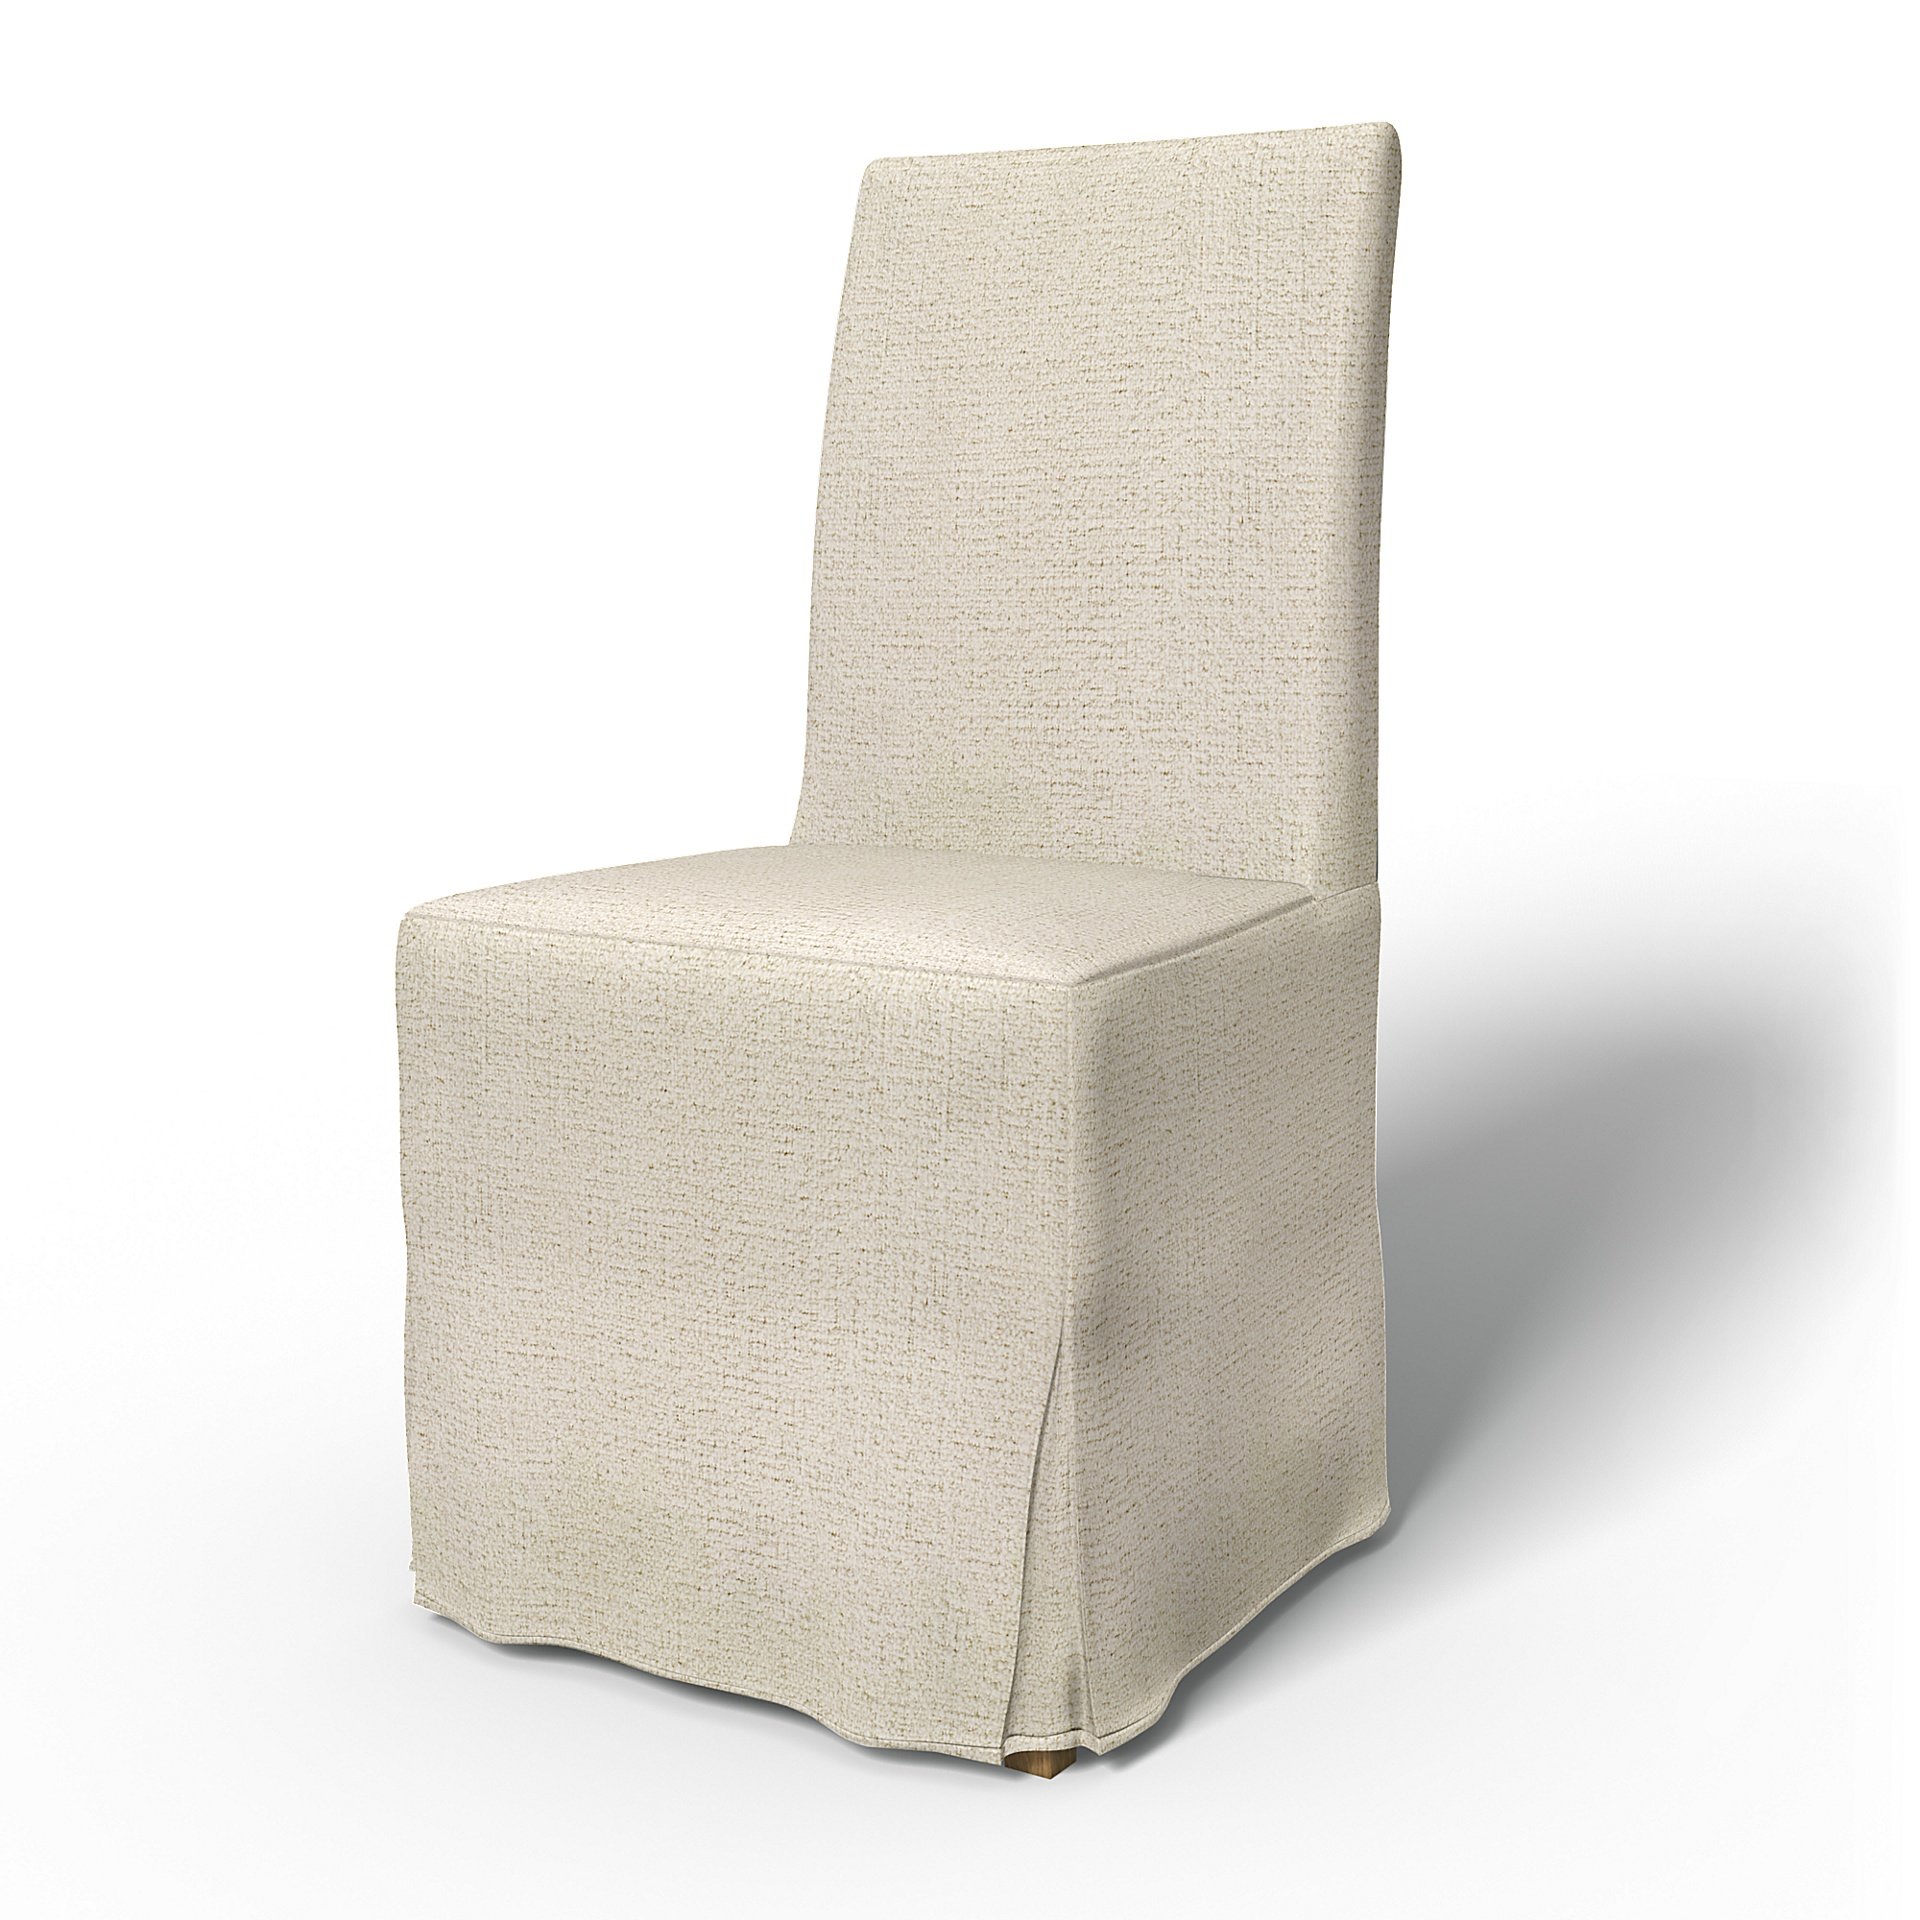 IKEA - Henriksdal Dining Chair Cover Long Skirt with Box Pleat (Standard model), Ecru, Boucle & Text